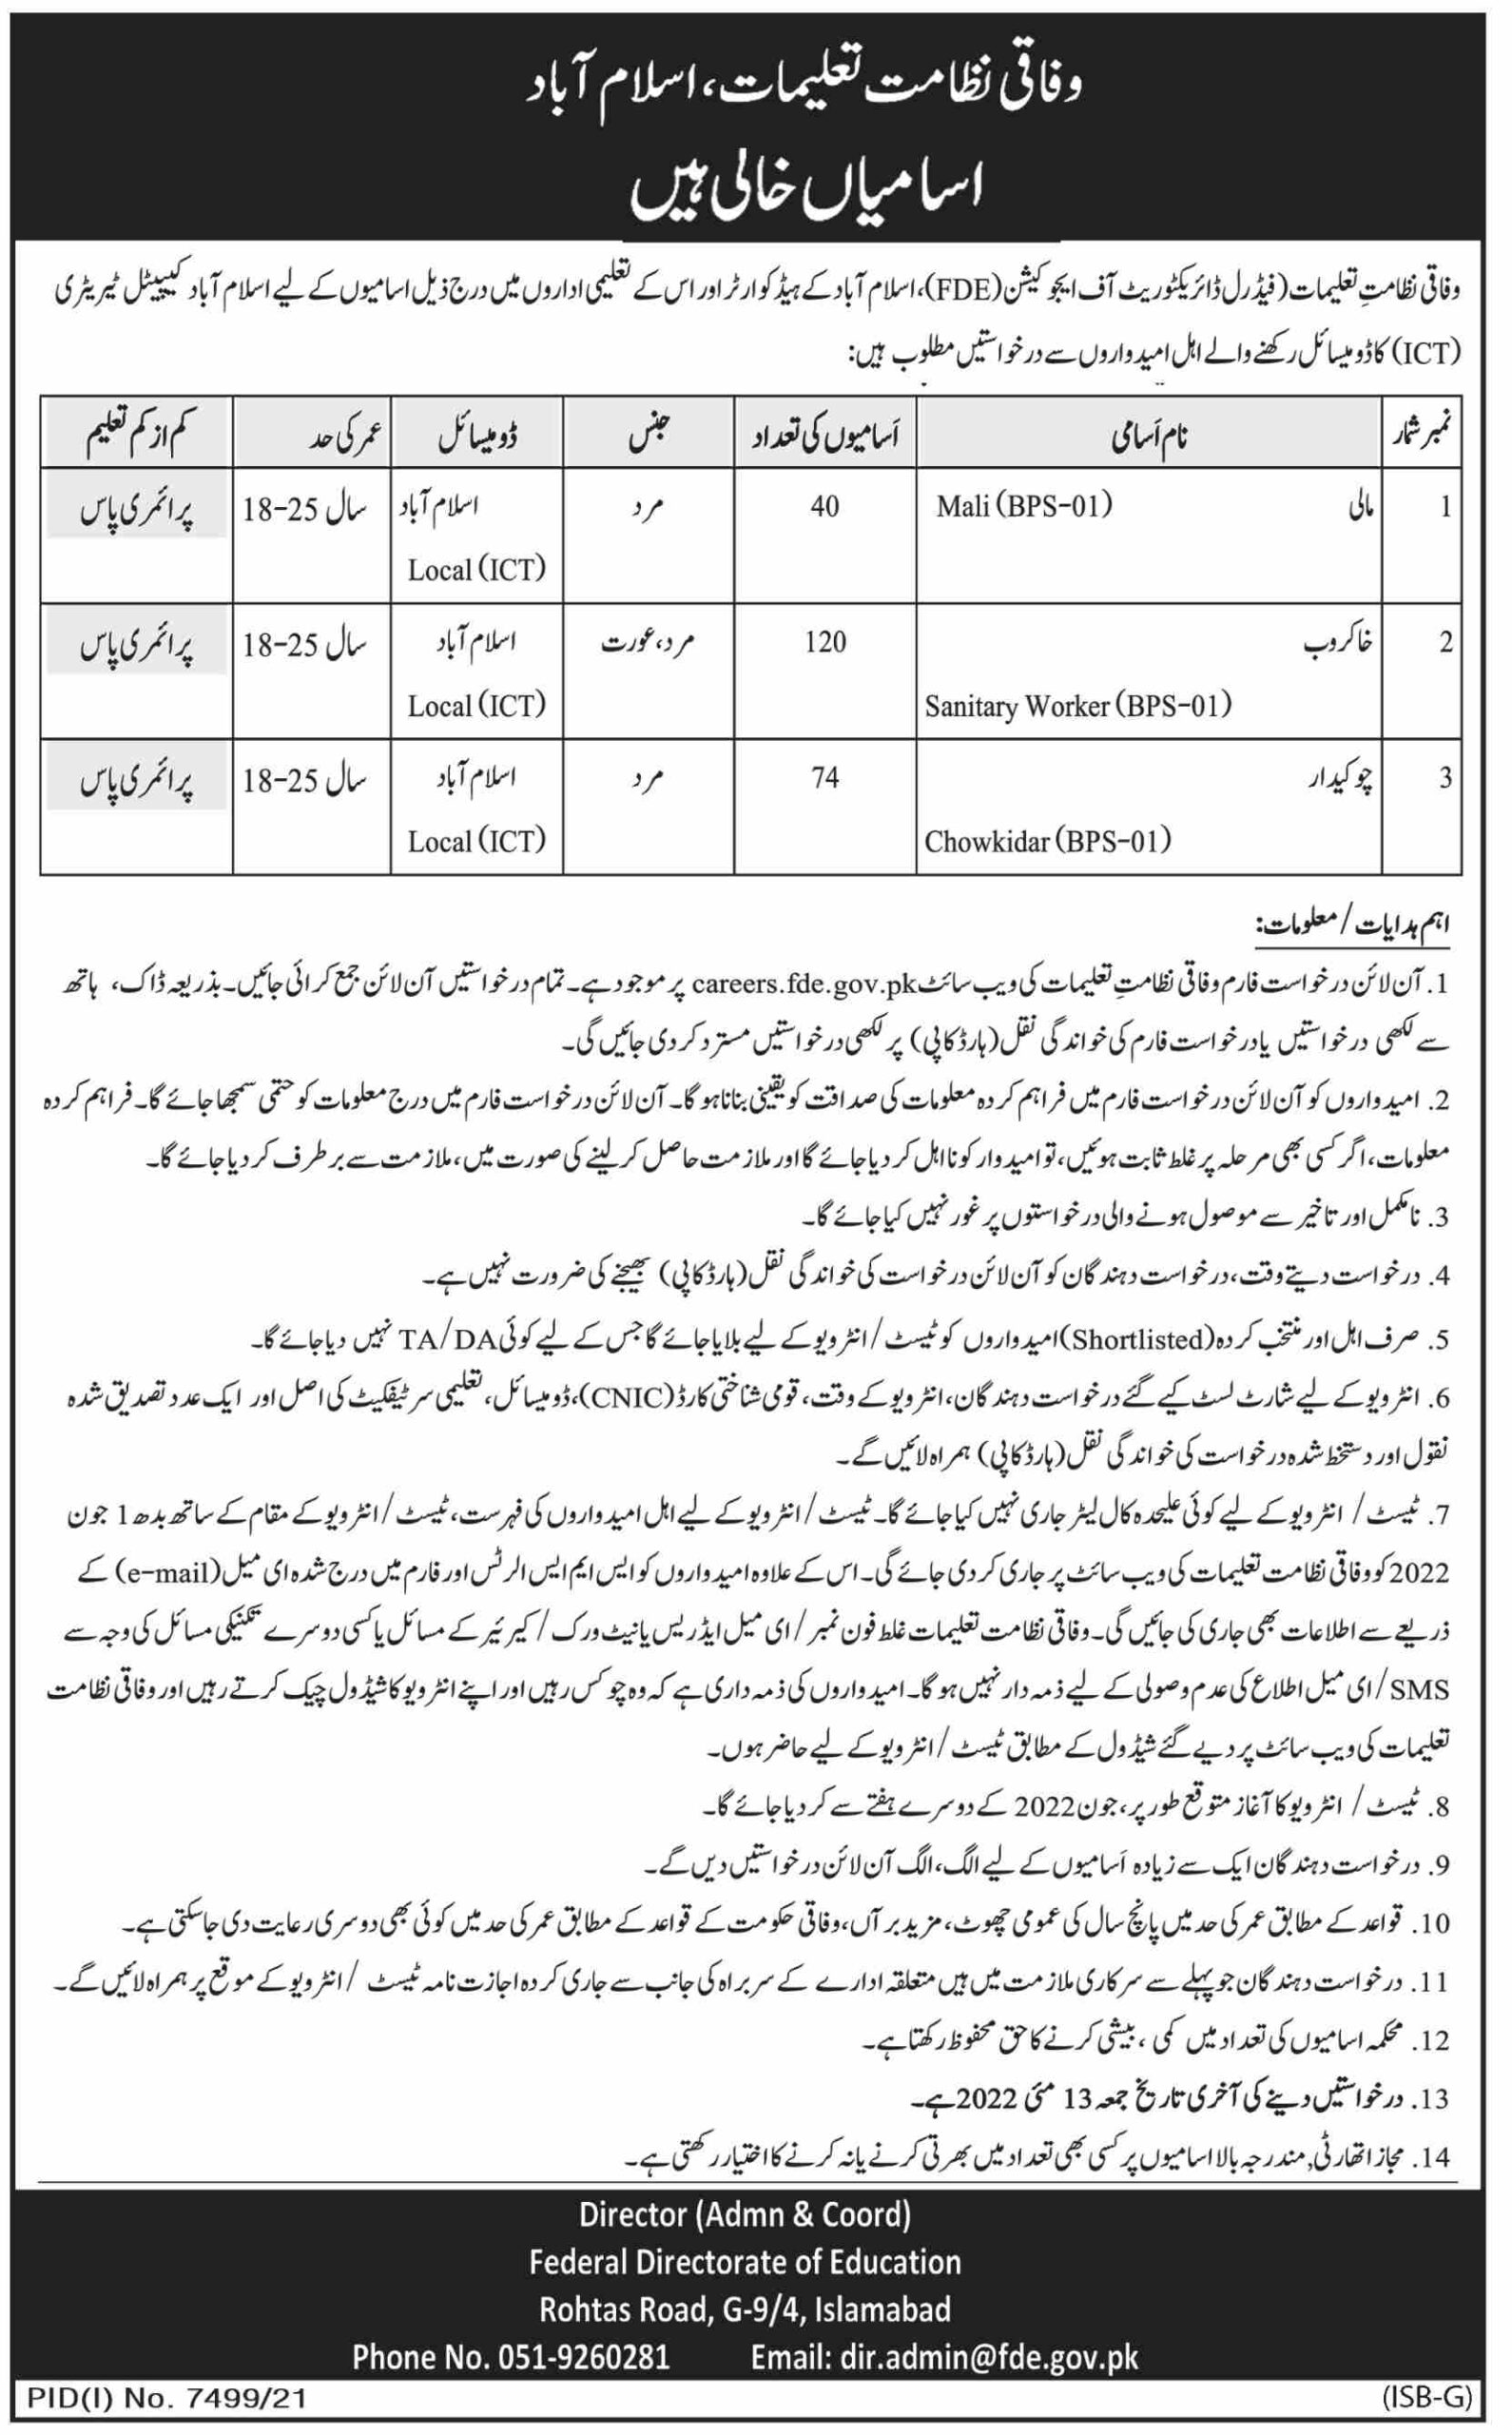 Federal Directorate of Education FDE Jobs 2022 Latest